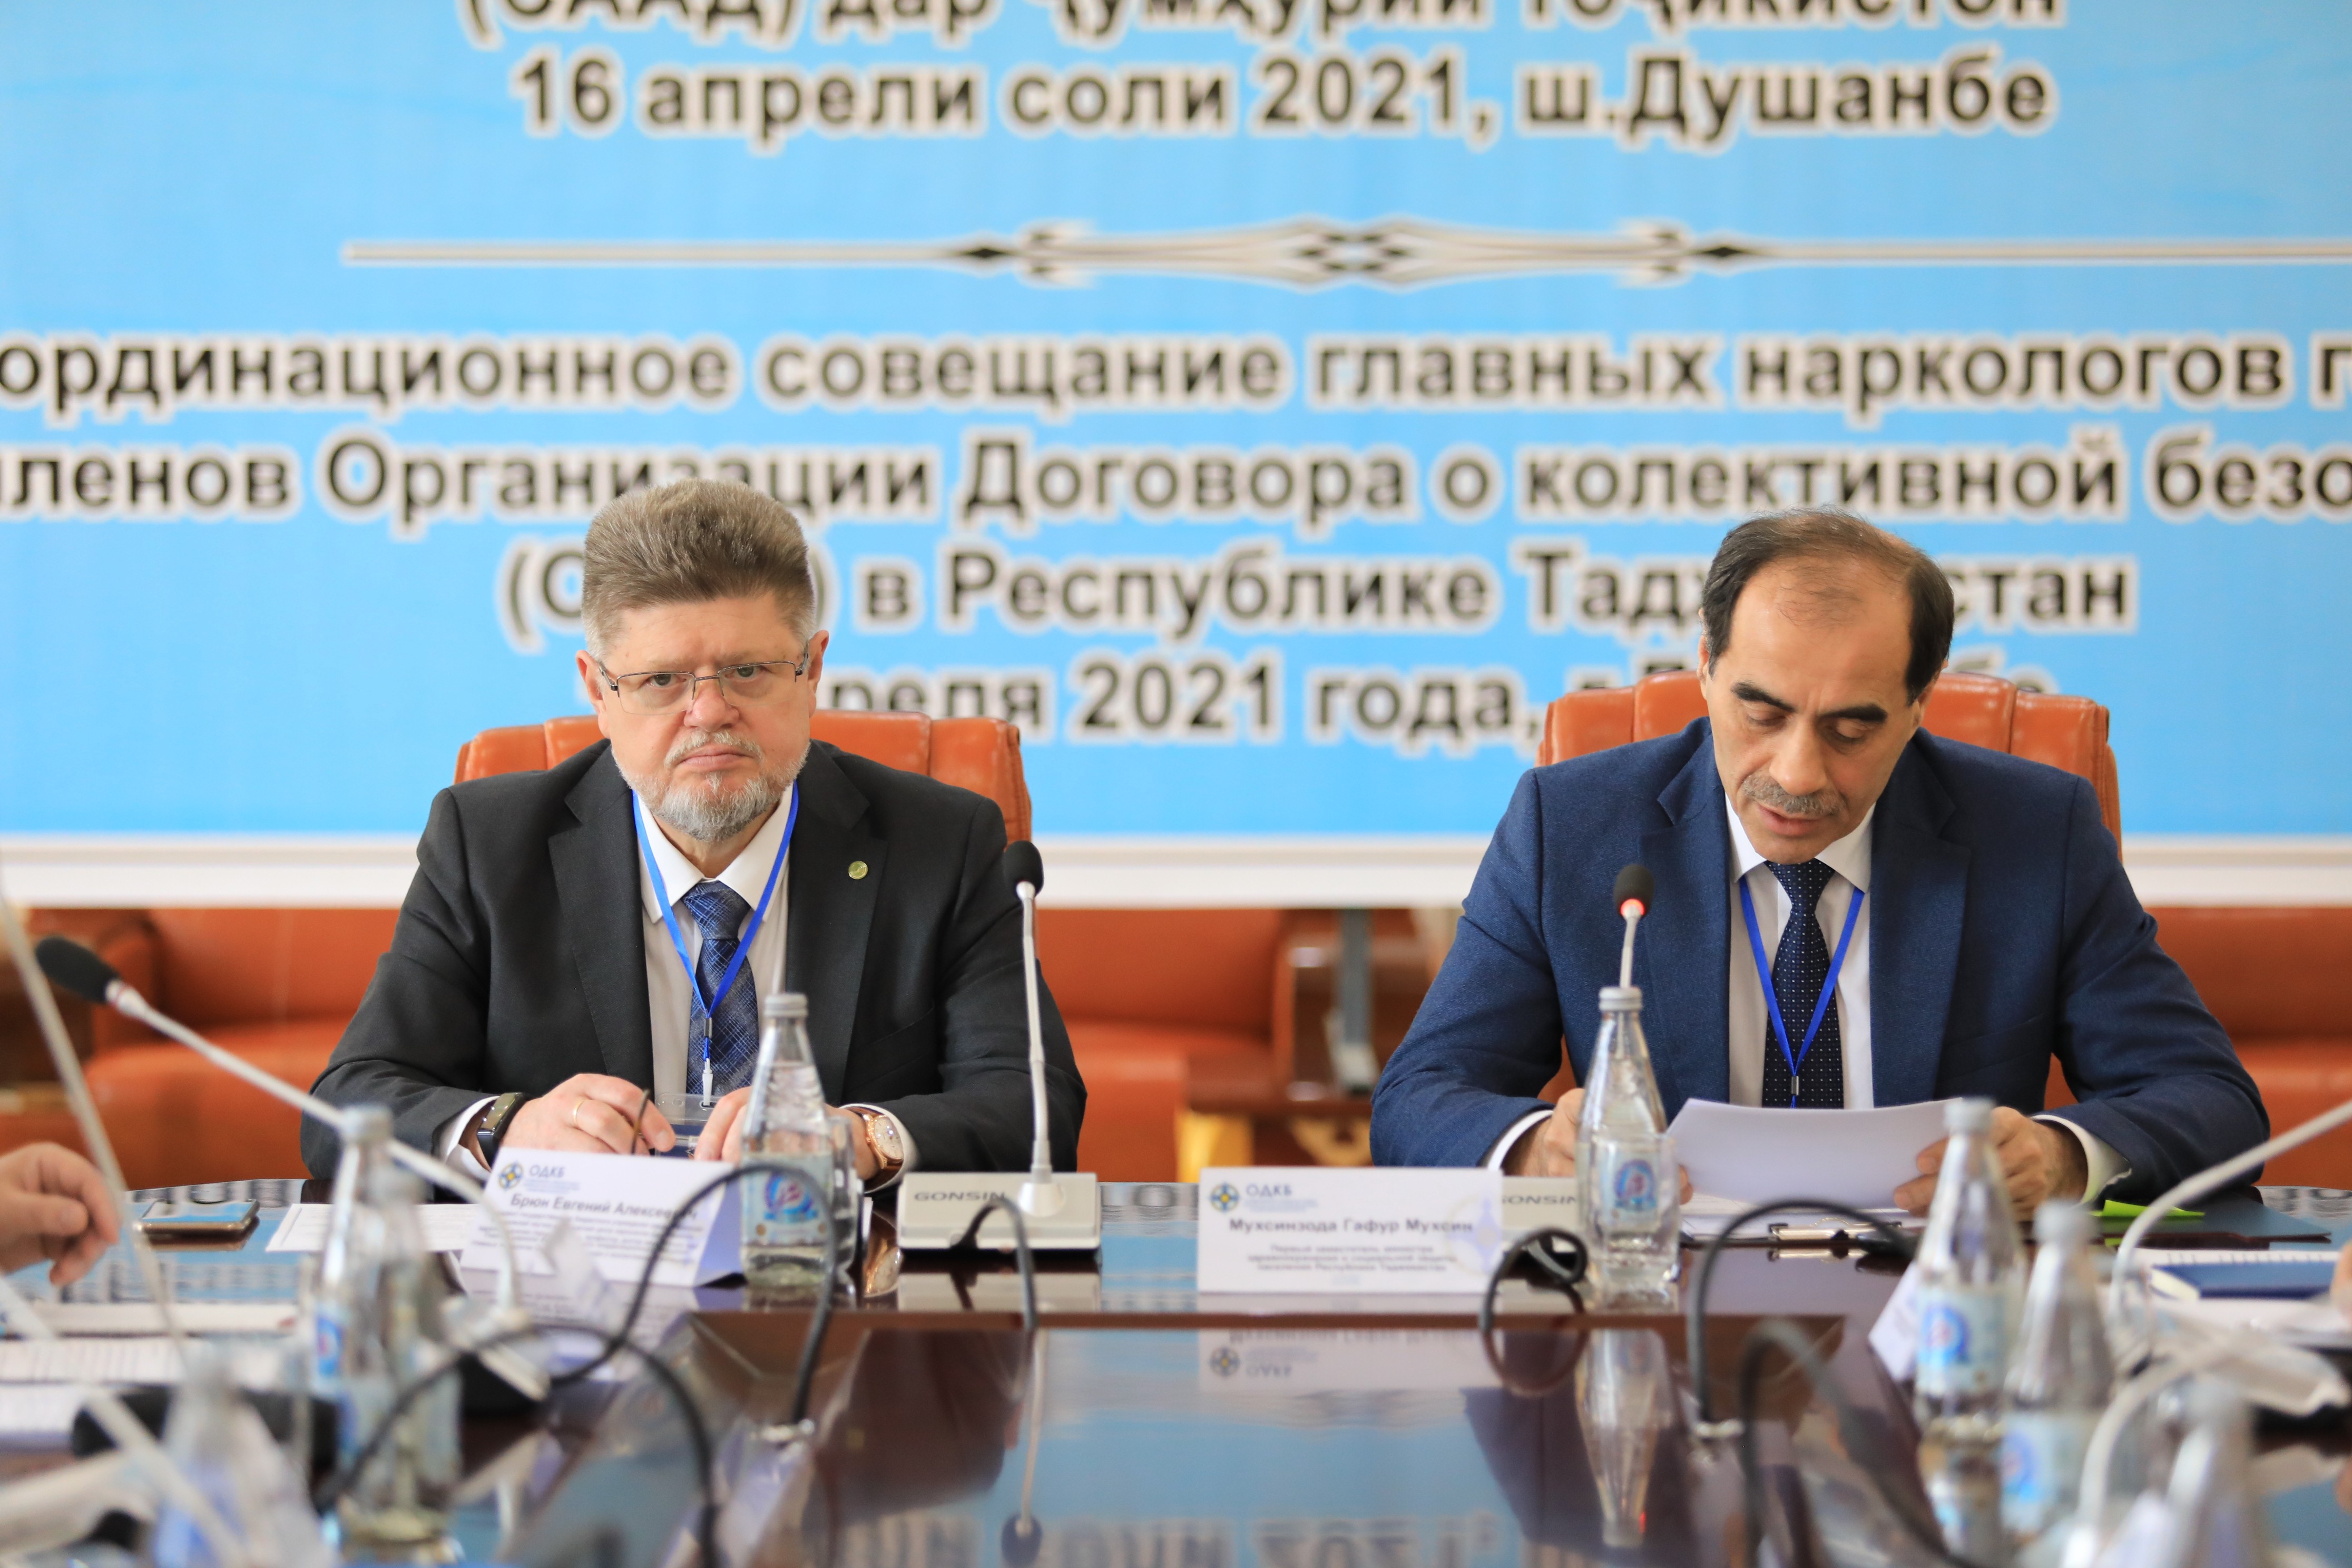 In Dushanbe, chief narcologists of the CSTO member states have discussed the situation related to non-medical drug use and the development of the drug situation 